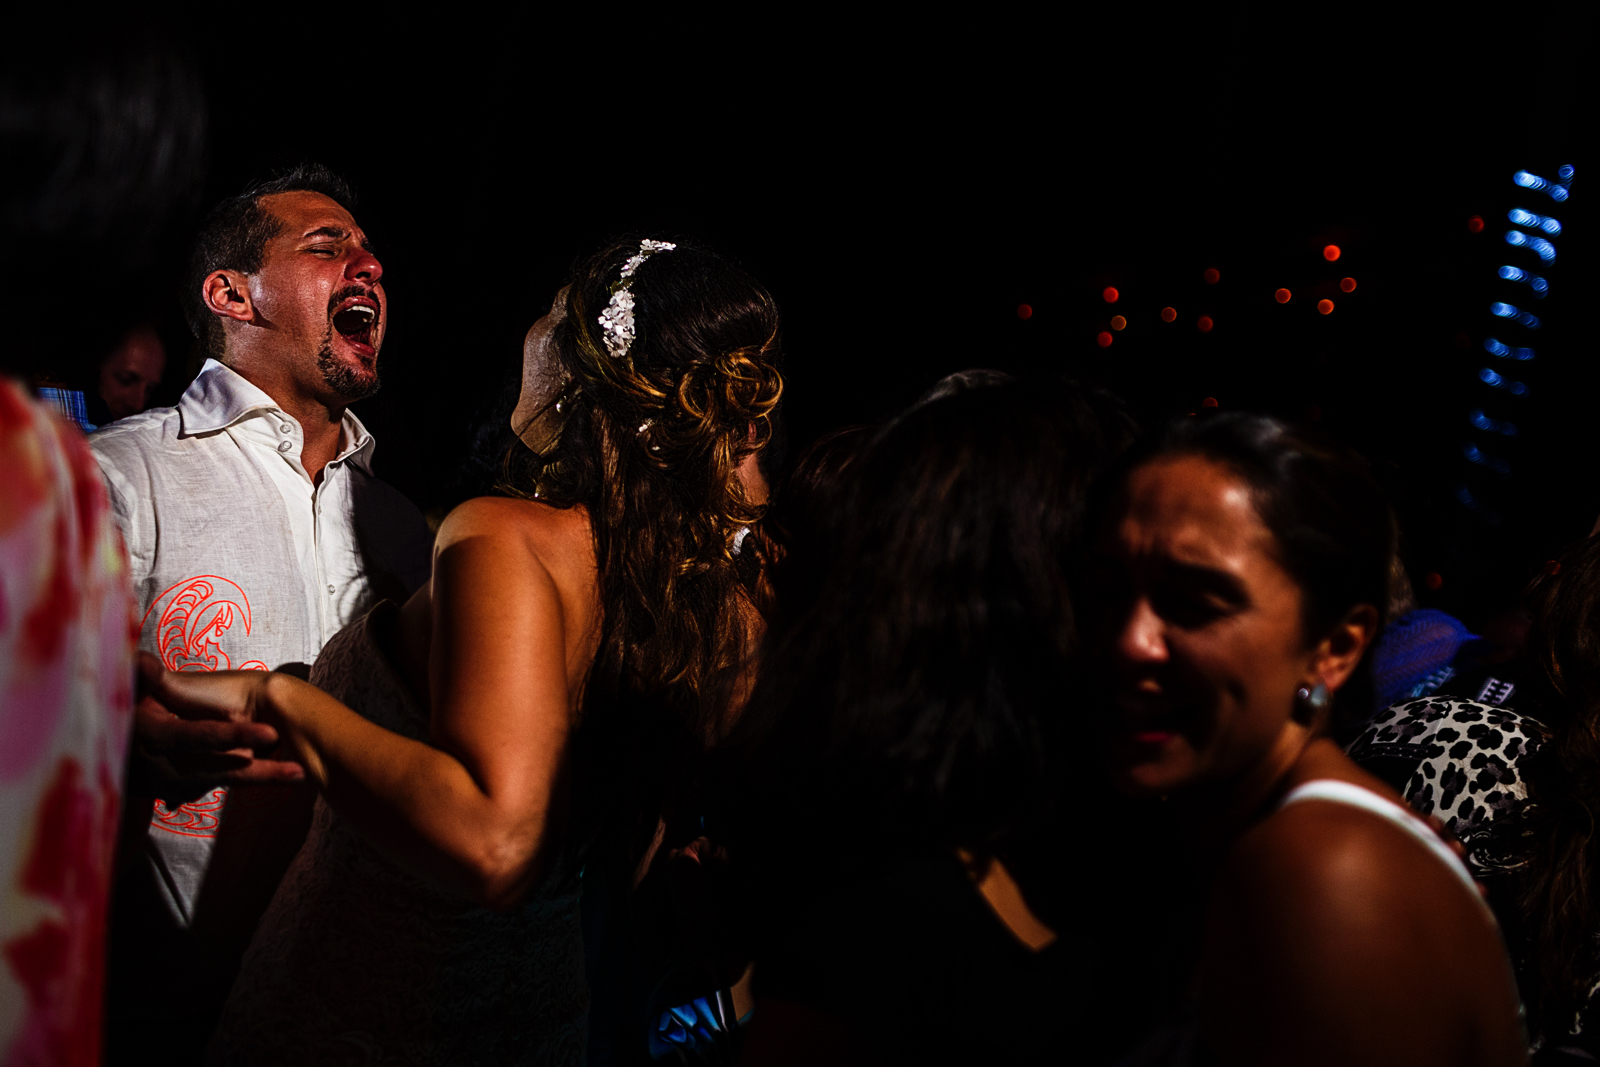 Groom singing while dancing with the bride in the crowd